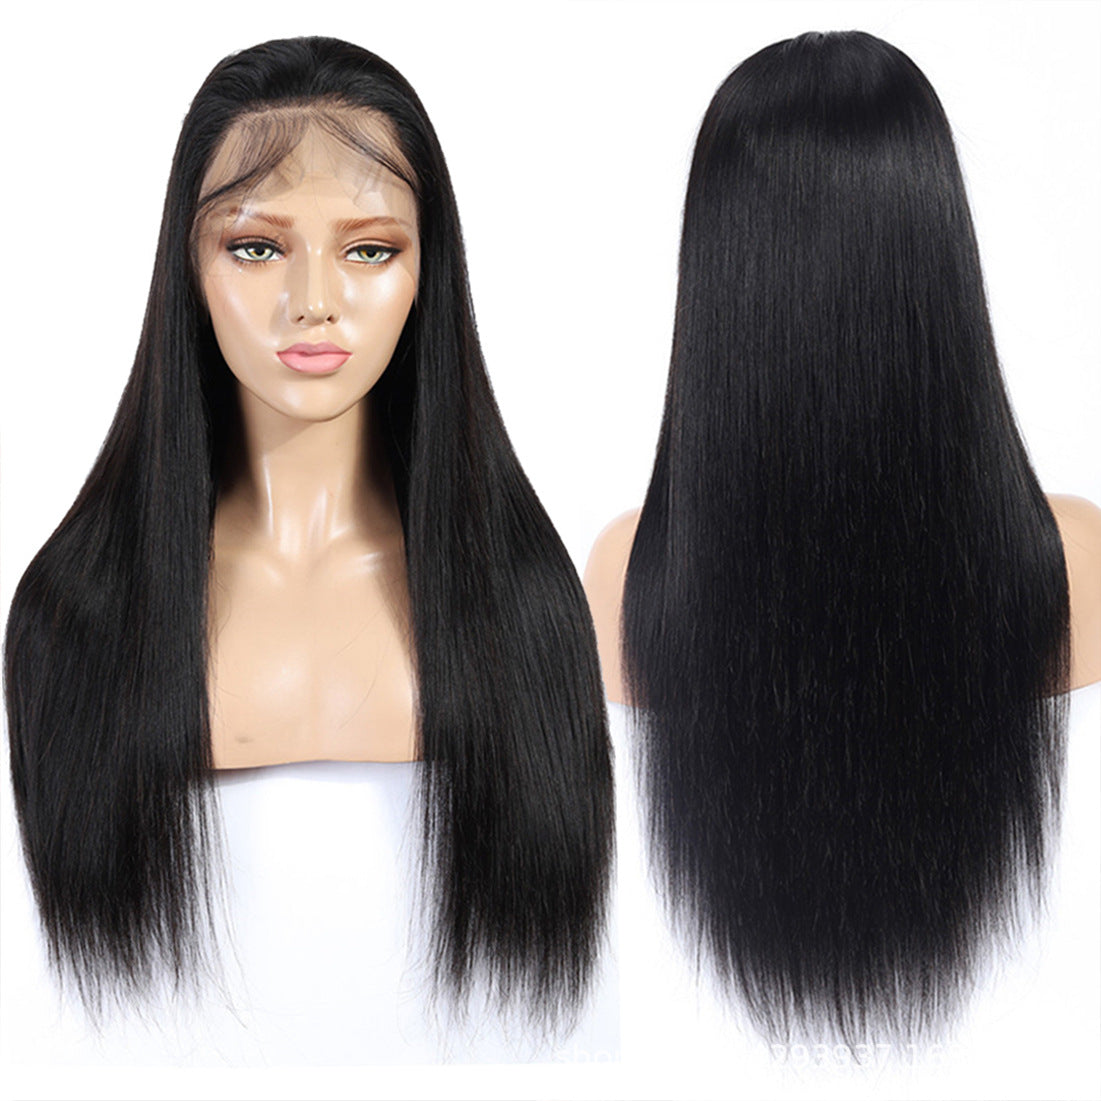 Long Black Straight Wig Real Human Hair for Women